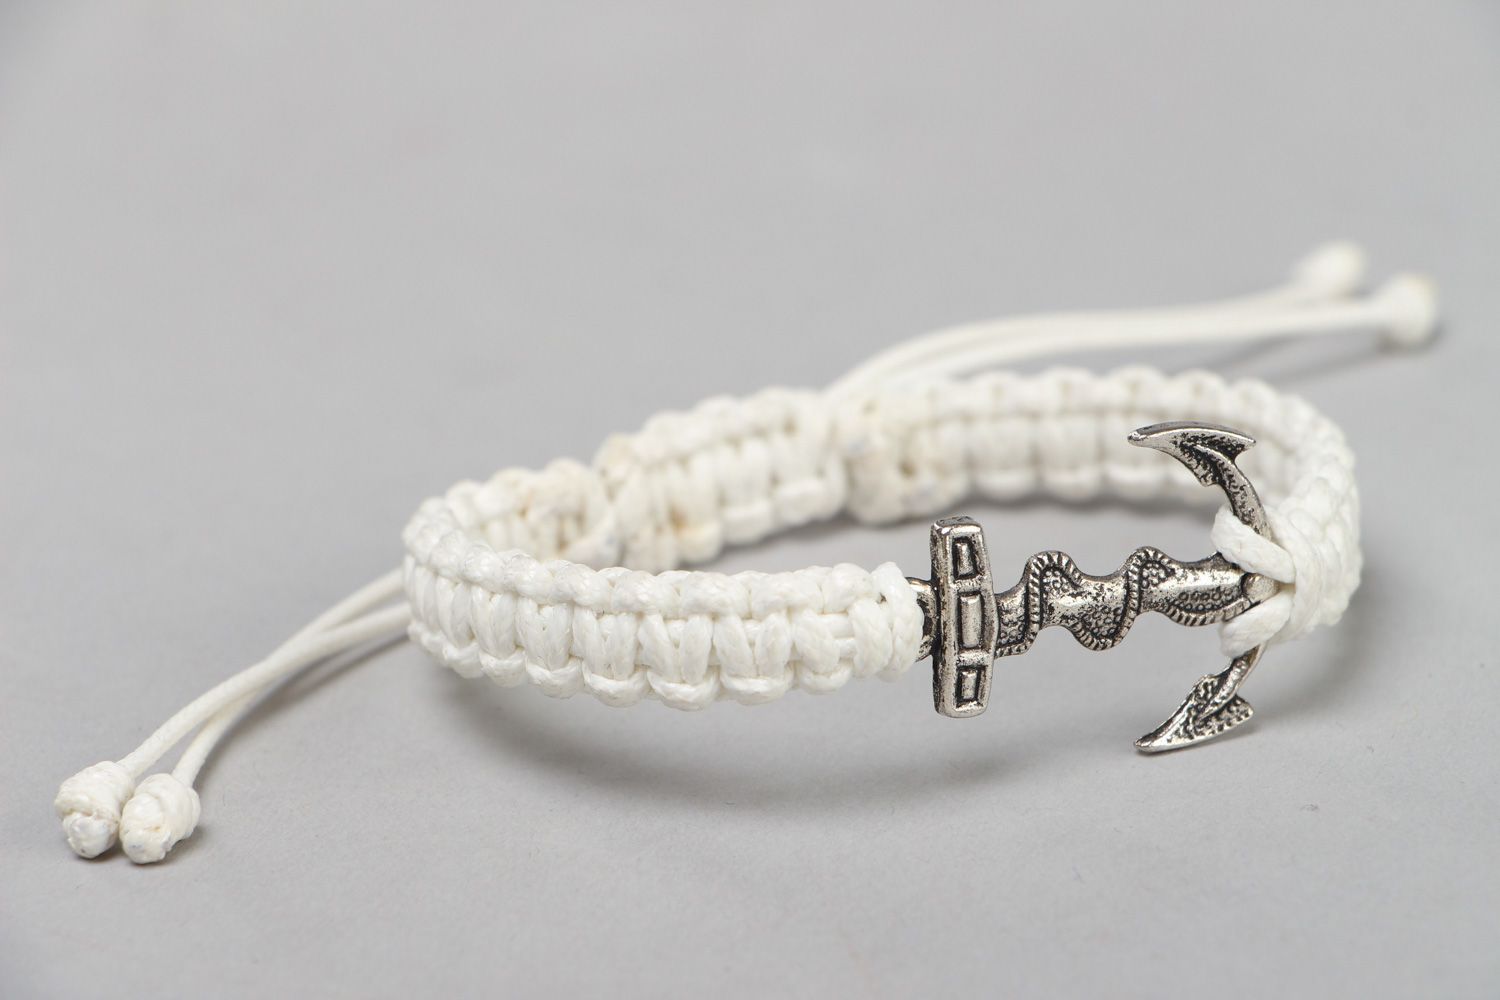 This handmade marine wrist bracelet woven of white synthetic cord for women photo 1